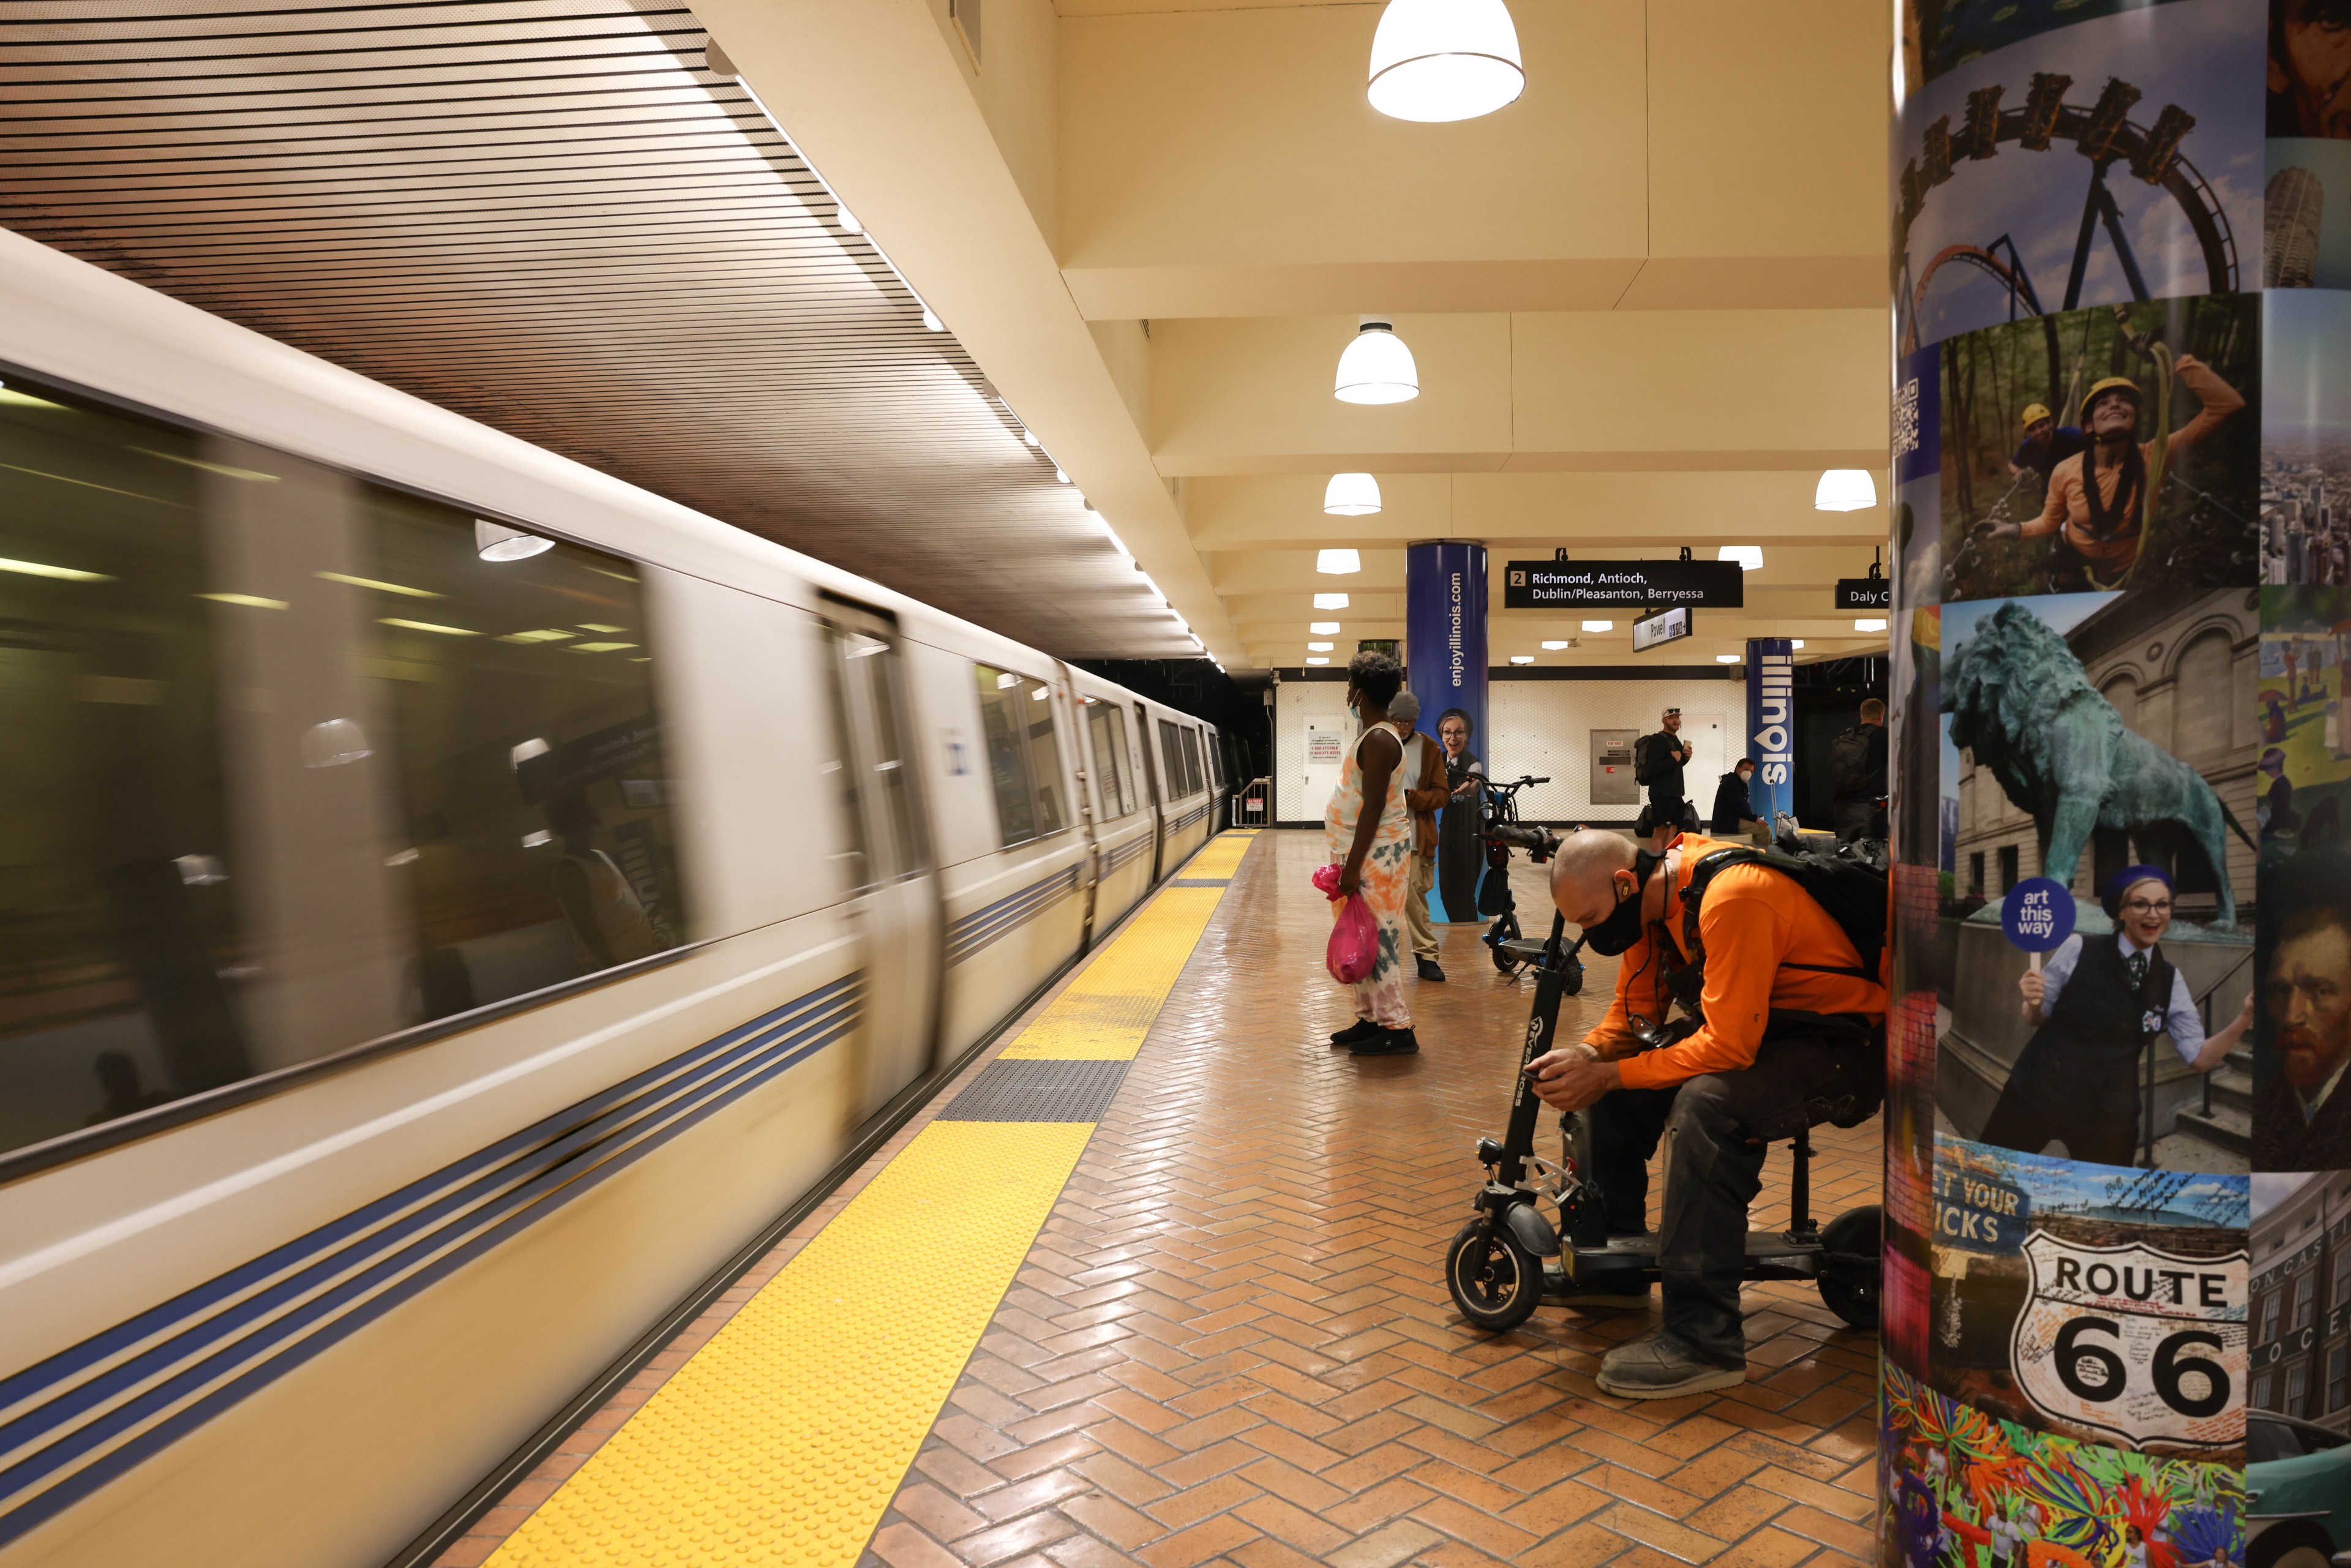 How BART Plans To Discipline Director Who Made Racist Comment